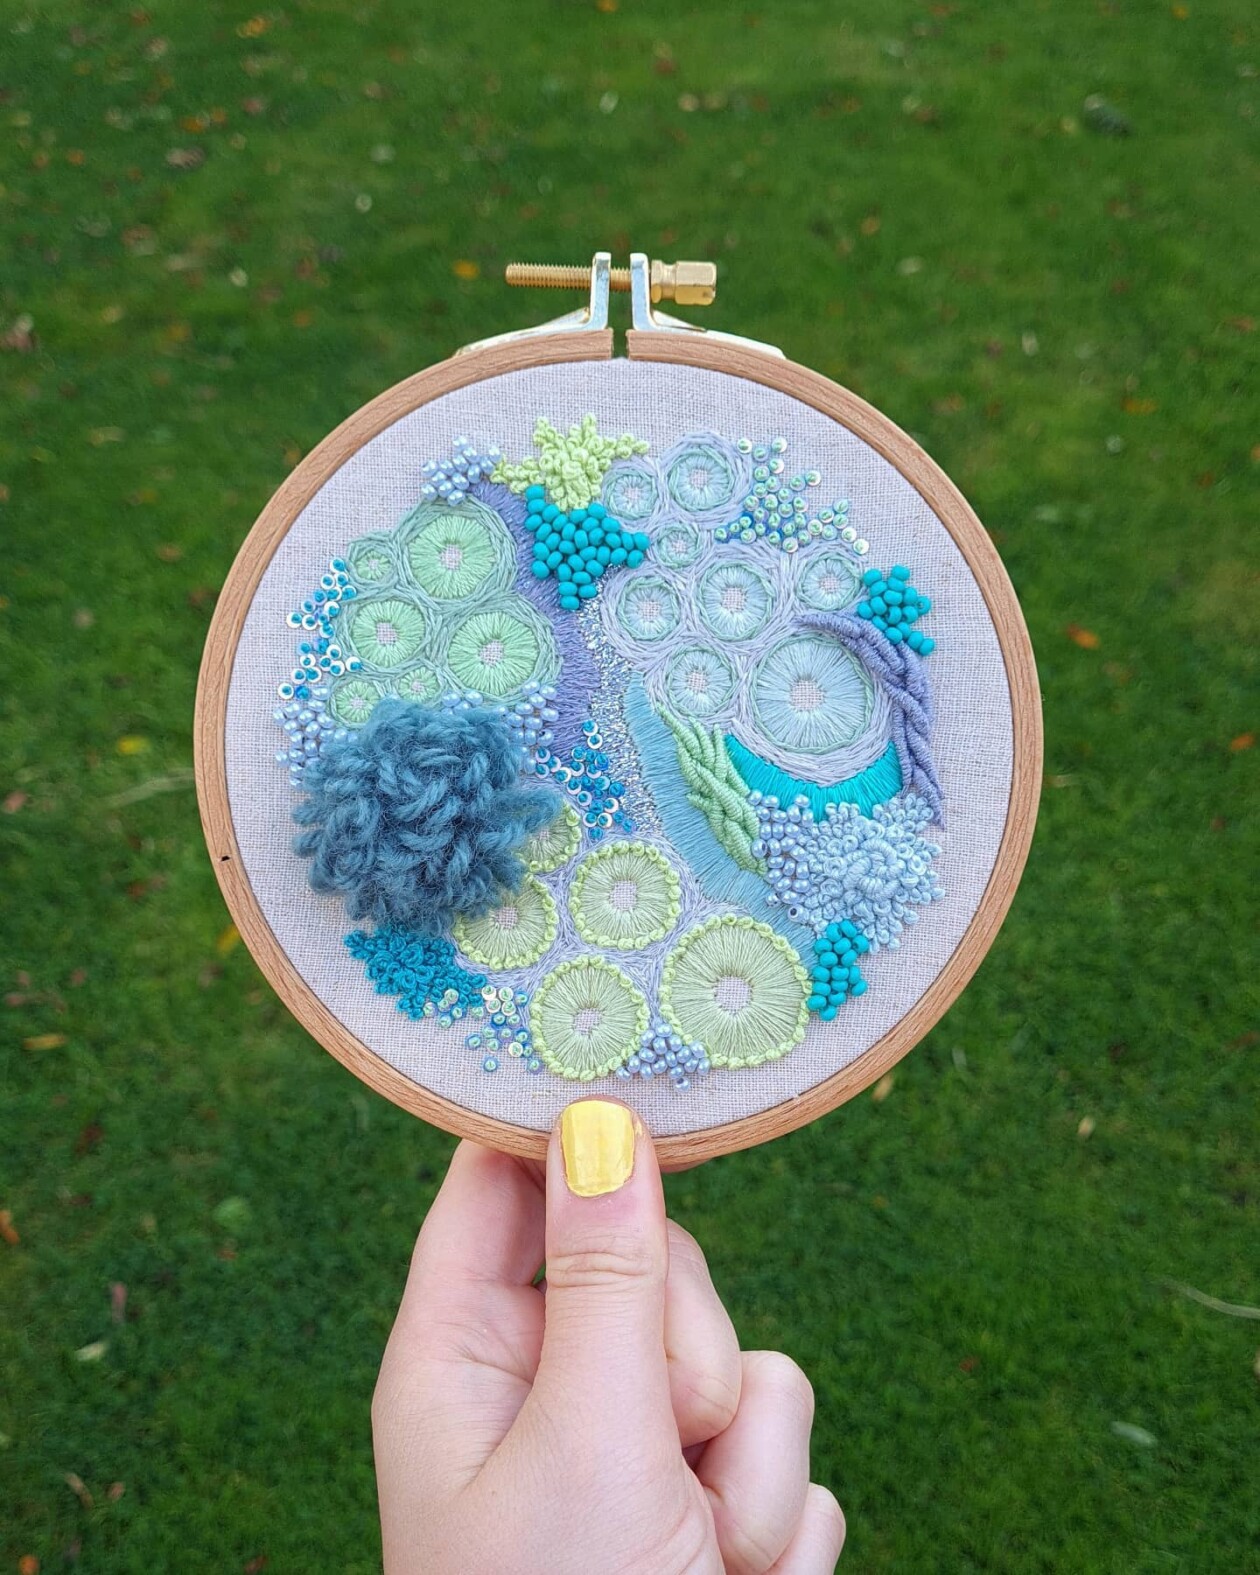 Marvelous Embroideries Inspired By Moss, Coral, And Lichen Forms By Hannah Kwasnycia (19)